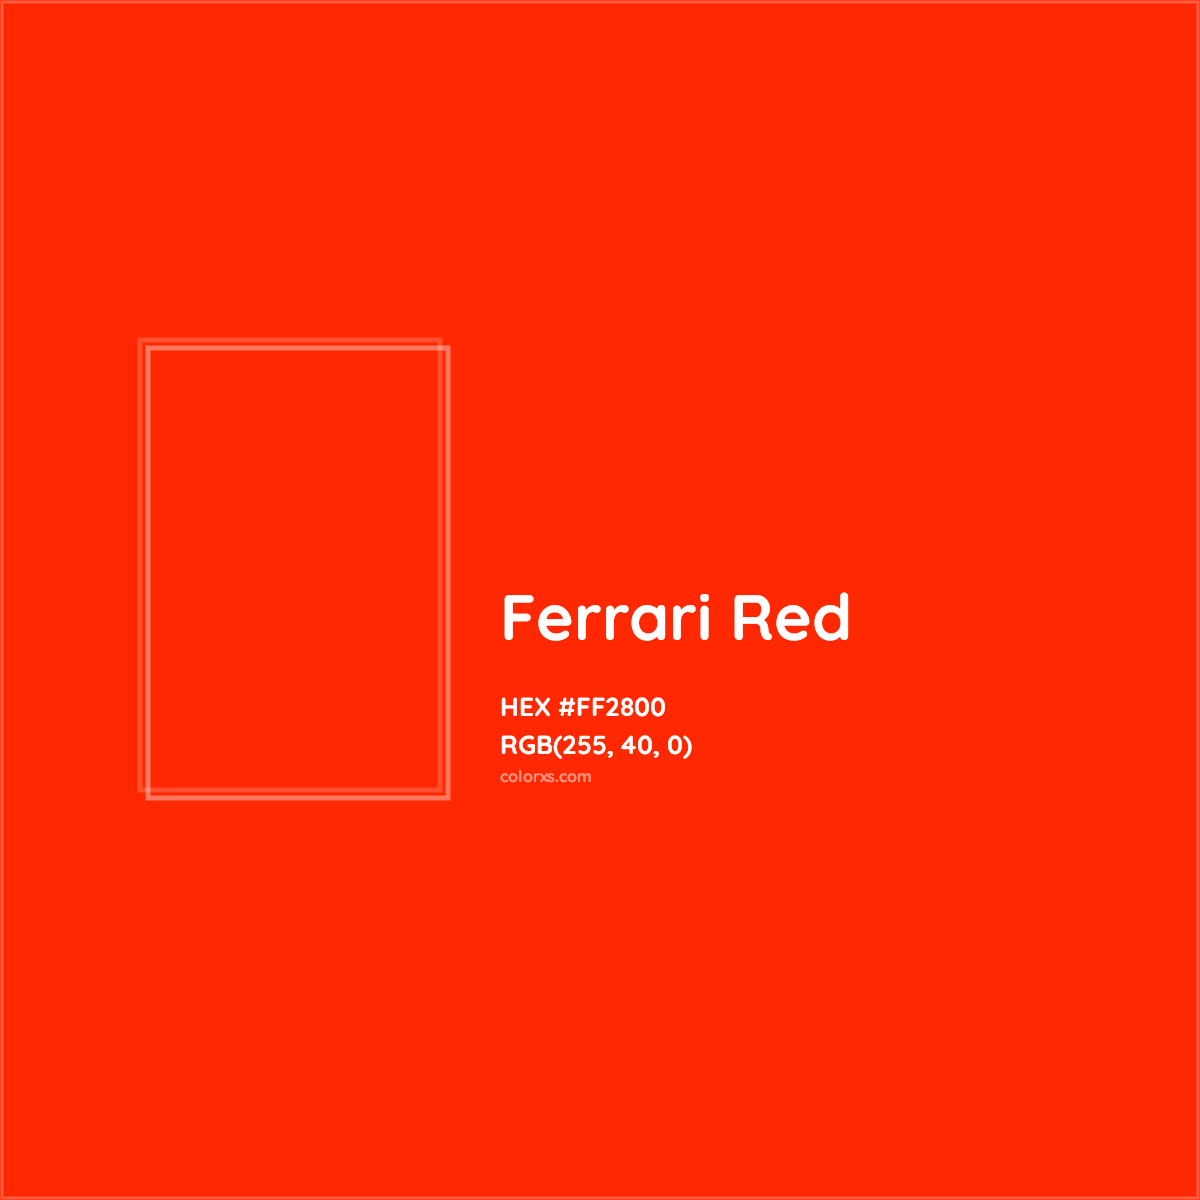 Forbyde redde knude About Ferrari Red Color - Color codes, similar colors and paints -  colorxs.com